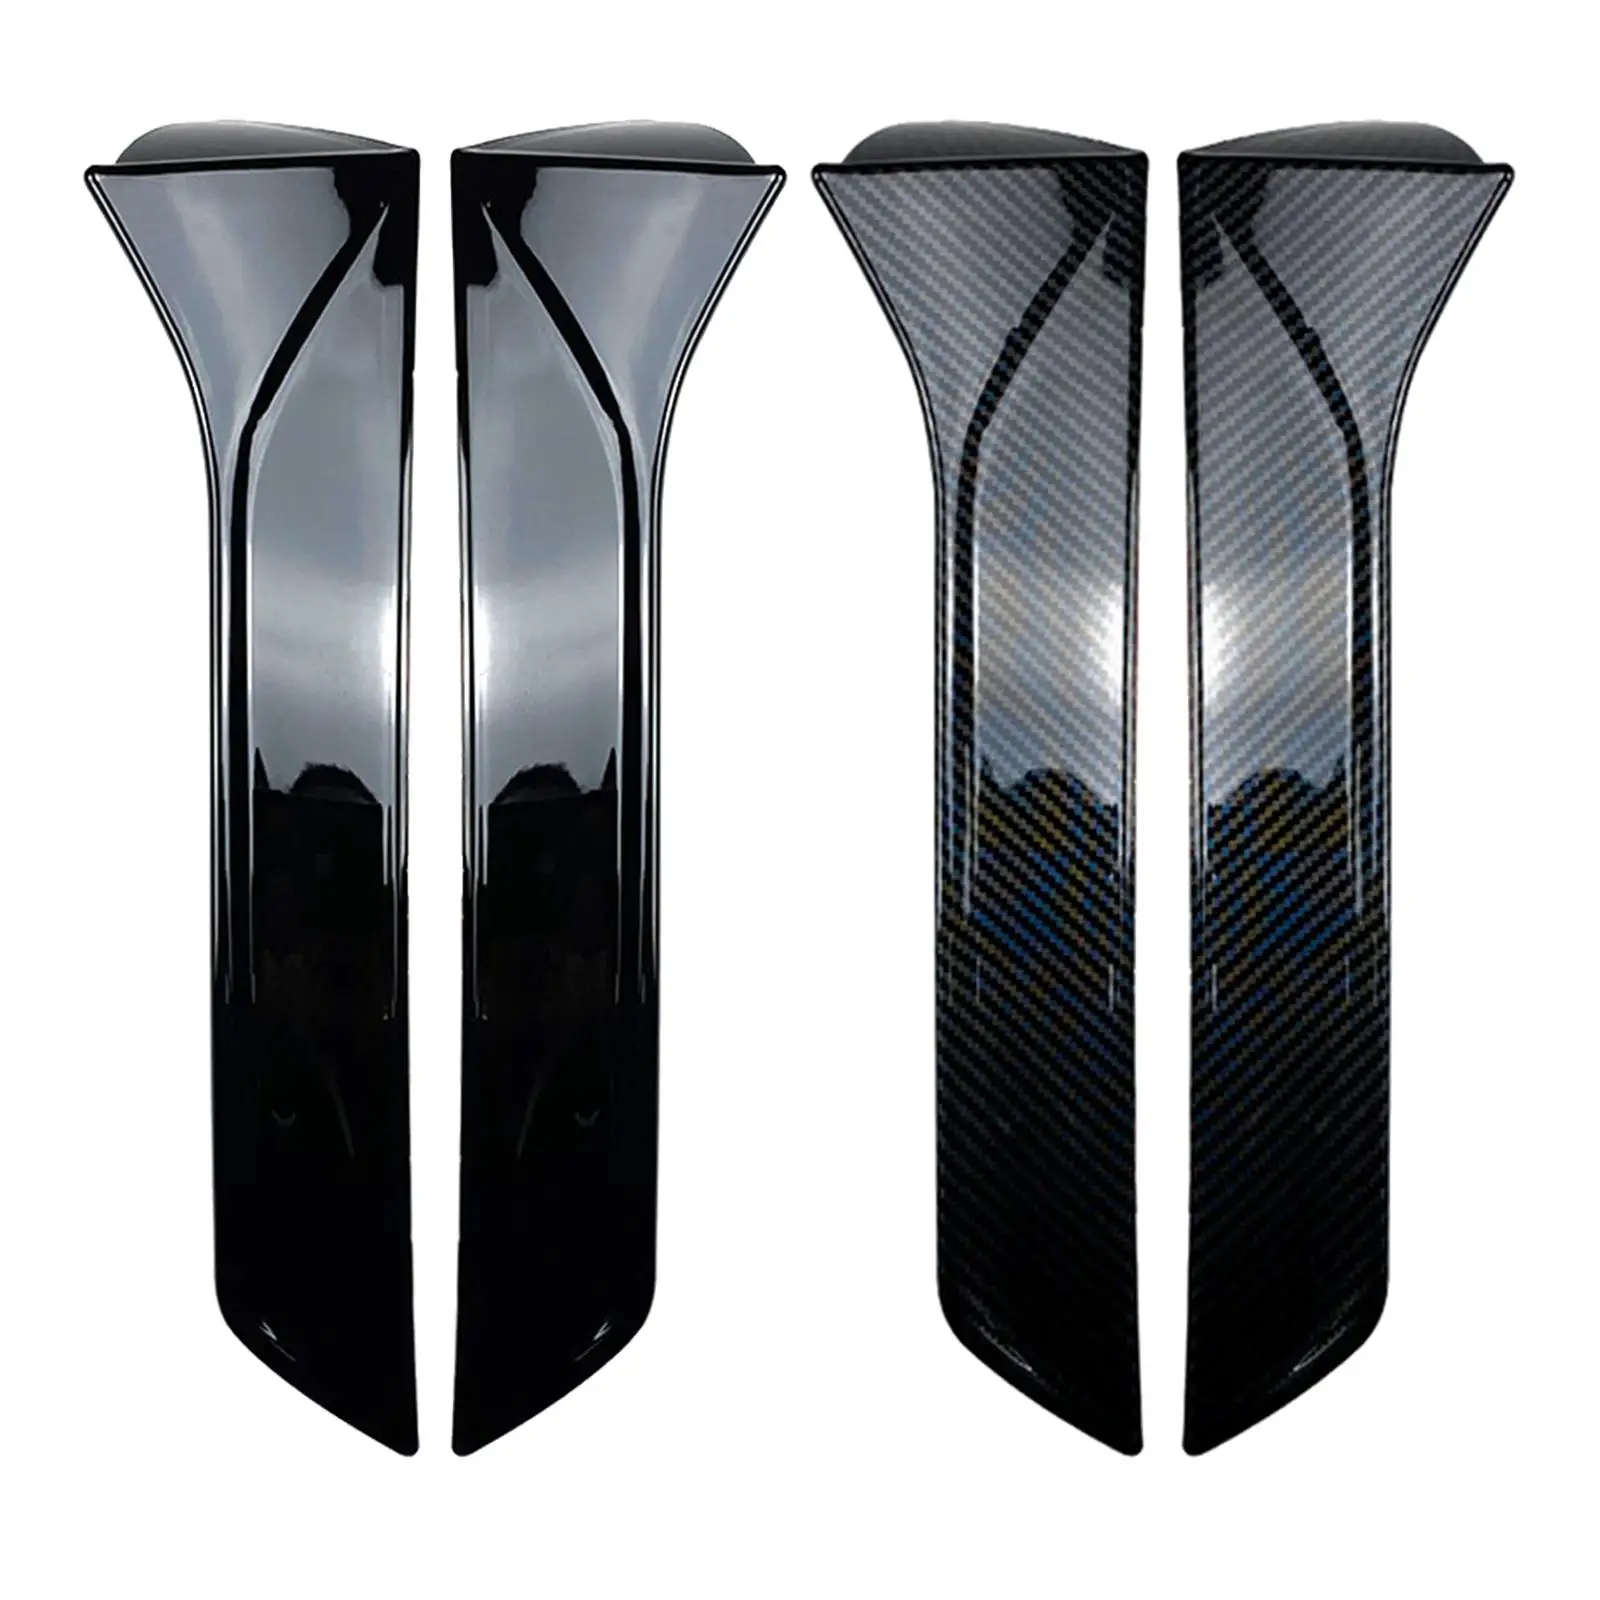 2x Car Window Spoiler, Rear Tail Flap Exterior Decor Parts Cover Trim Vertical Splitter Auto Styling Rear Wing Side Edge